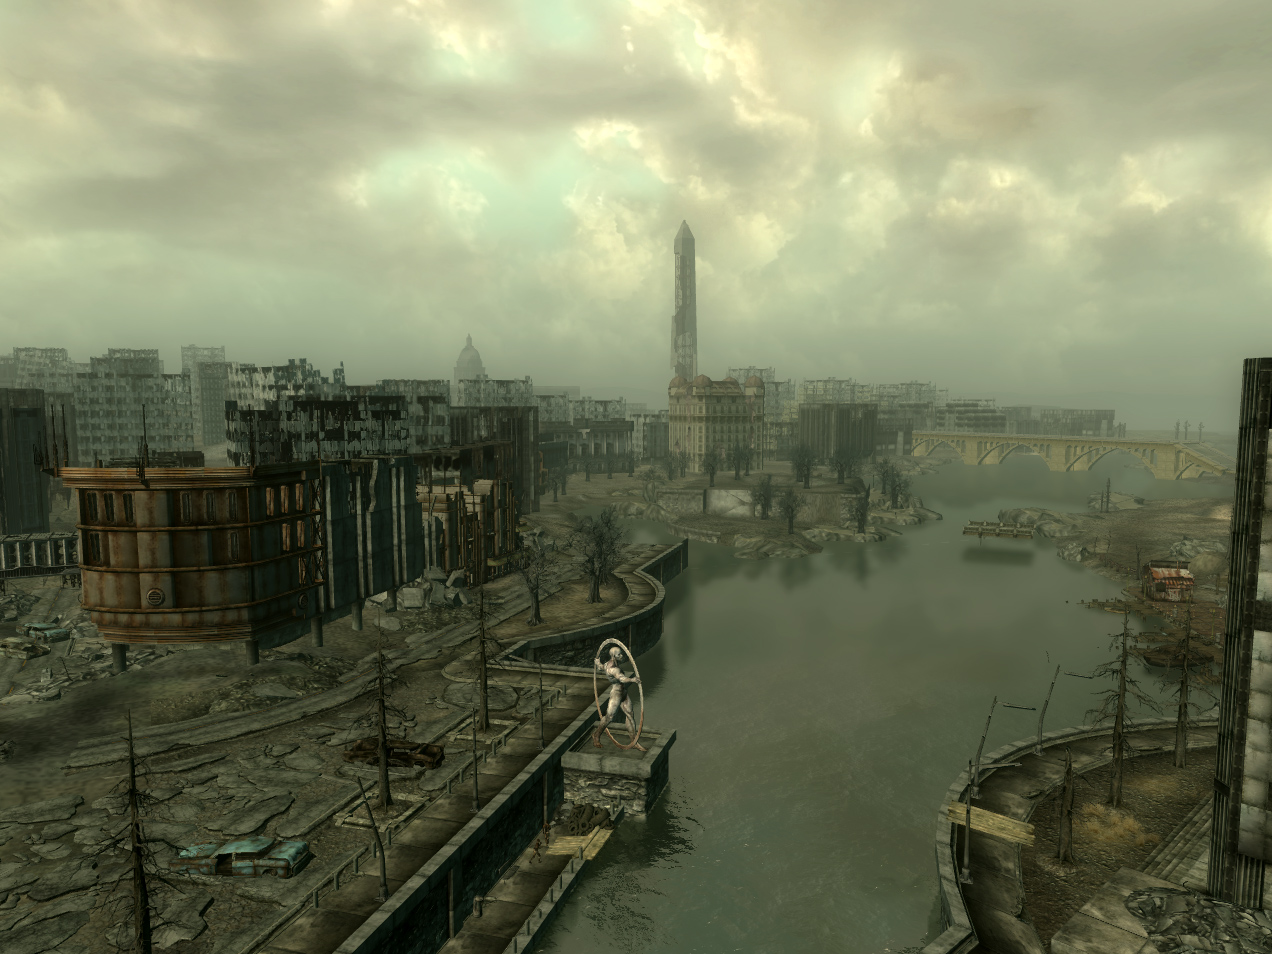 Washington Is a Ruin in Bethesda's Fallout 3 - The New York Times